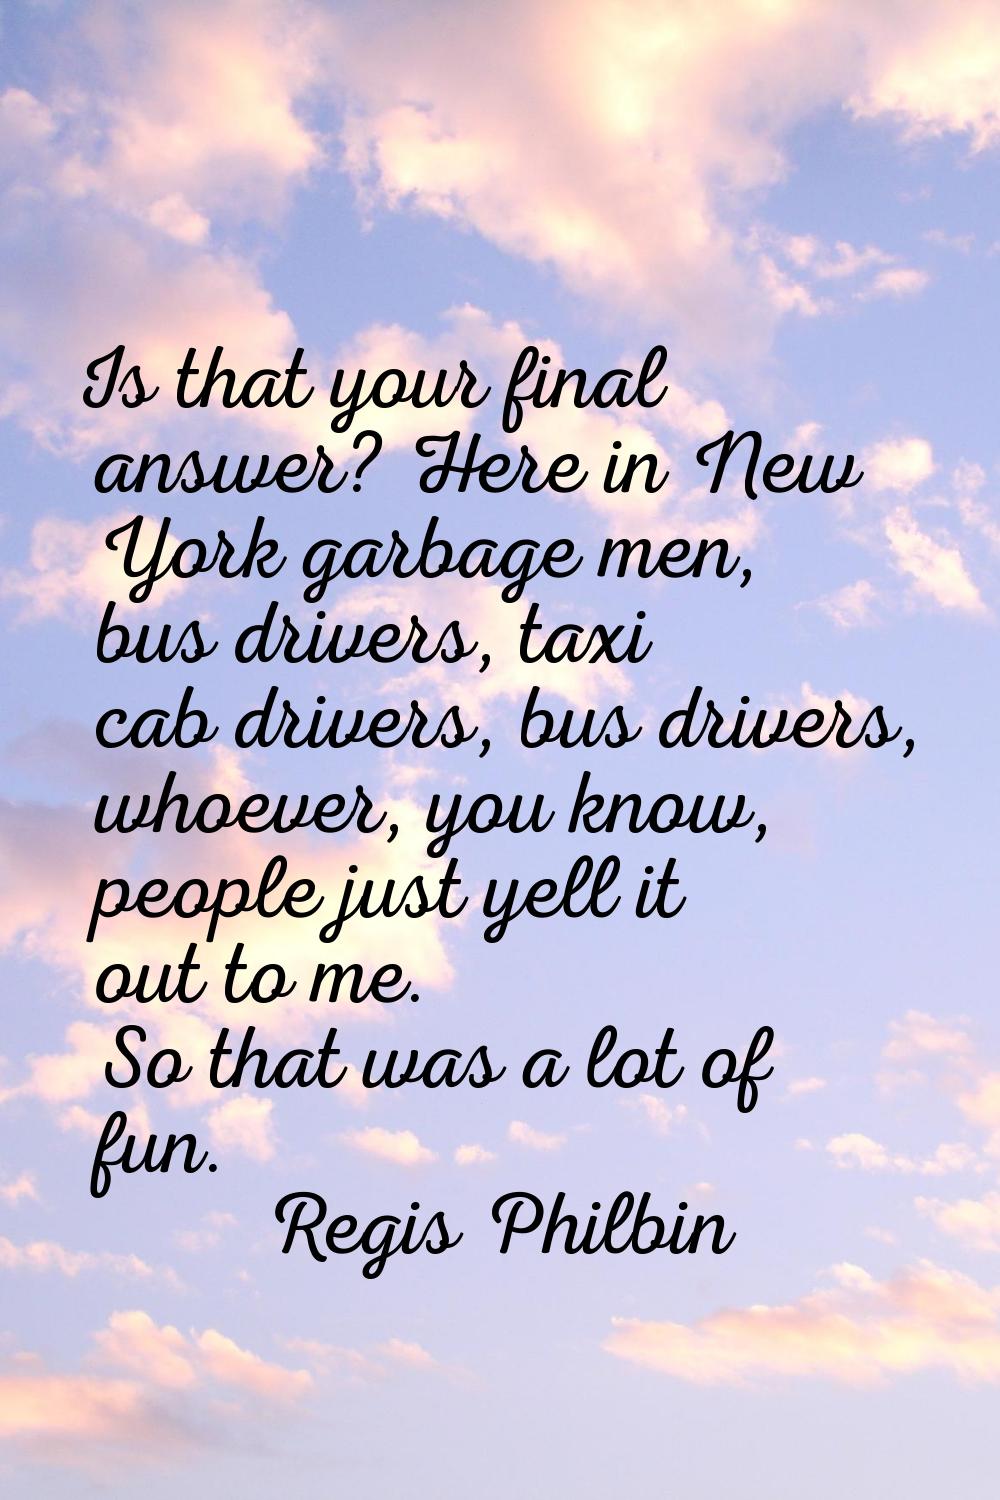 Is that your final answer? Here in New York garbage men, bus drivers, taxi cab drivers, bus drivers